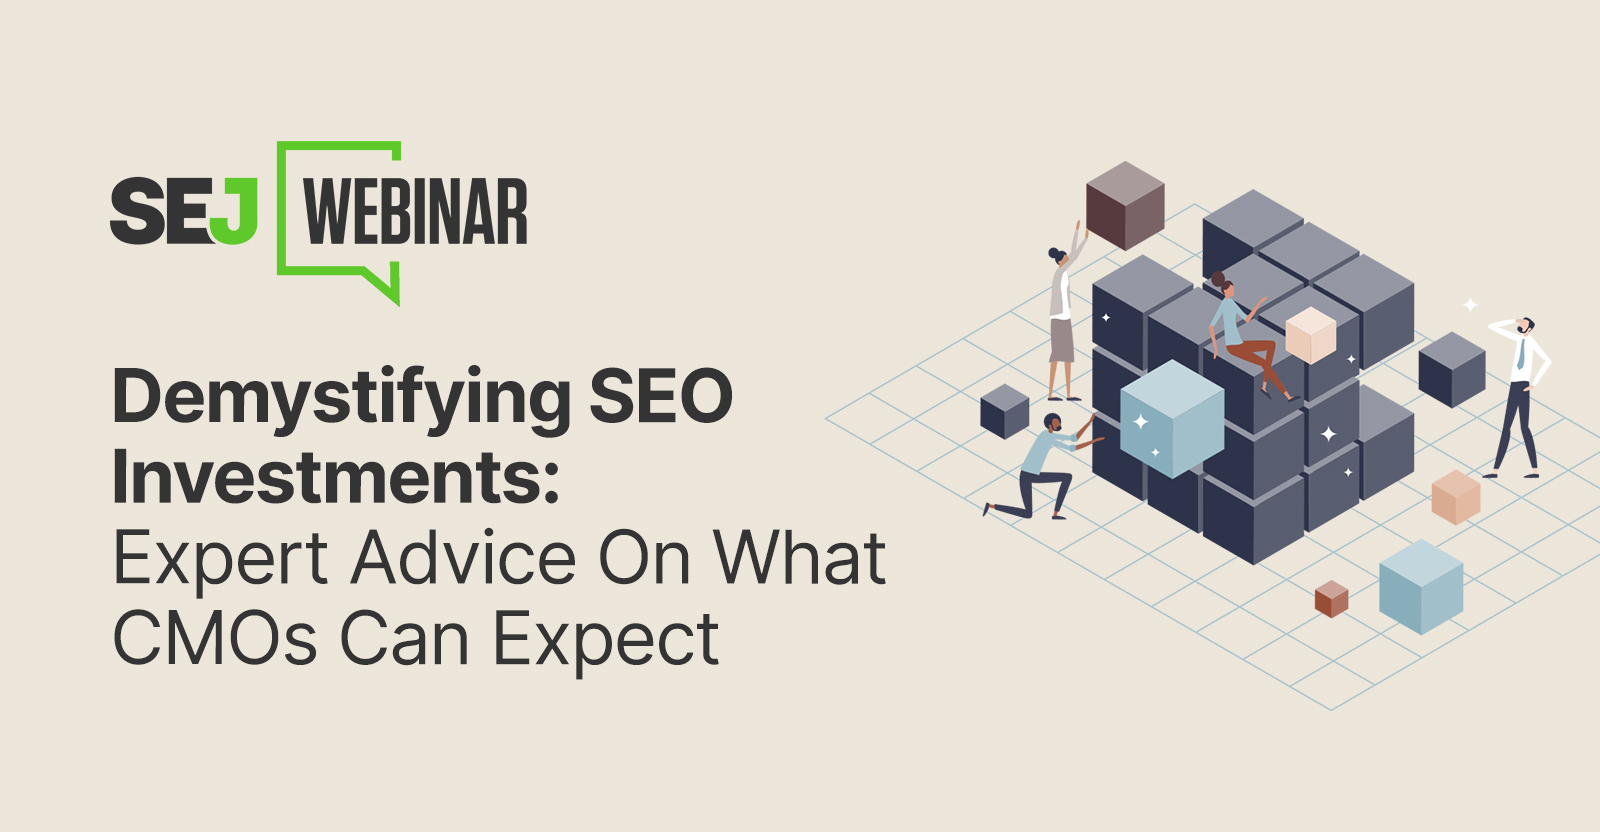 Demystifying SEO Investments: Expert Advice On What CMOs Can Expect [Webinar] via @sejournal, @hethr_campbell